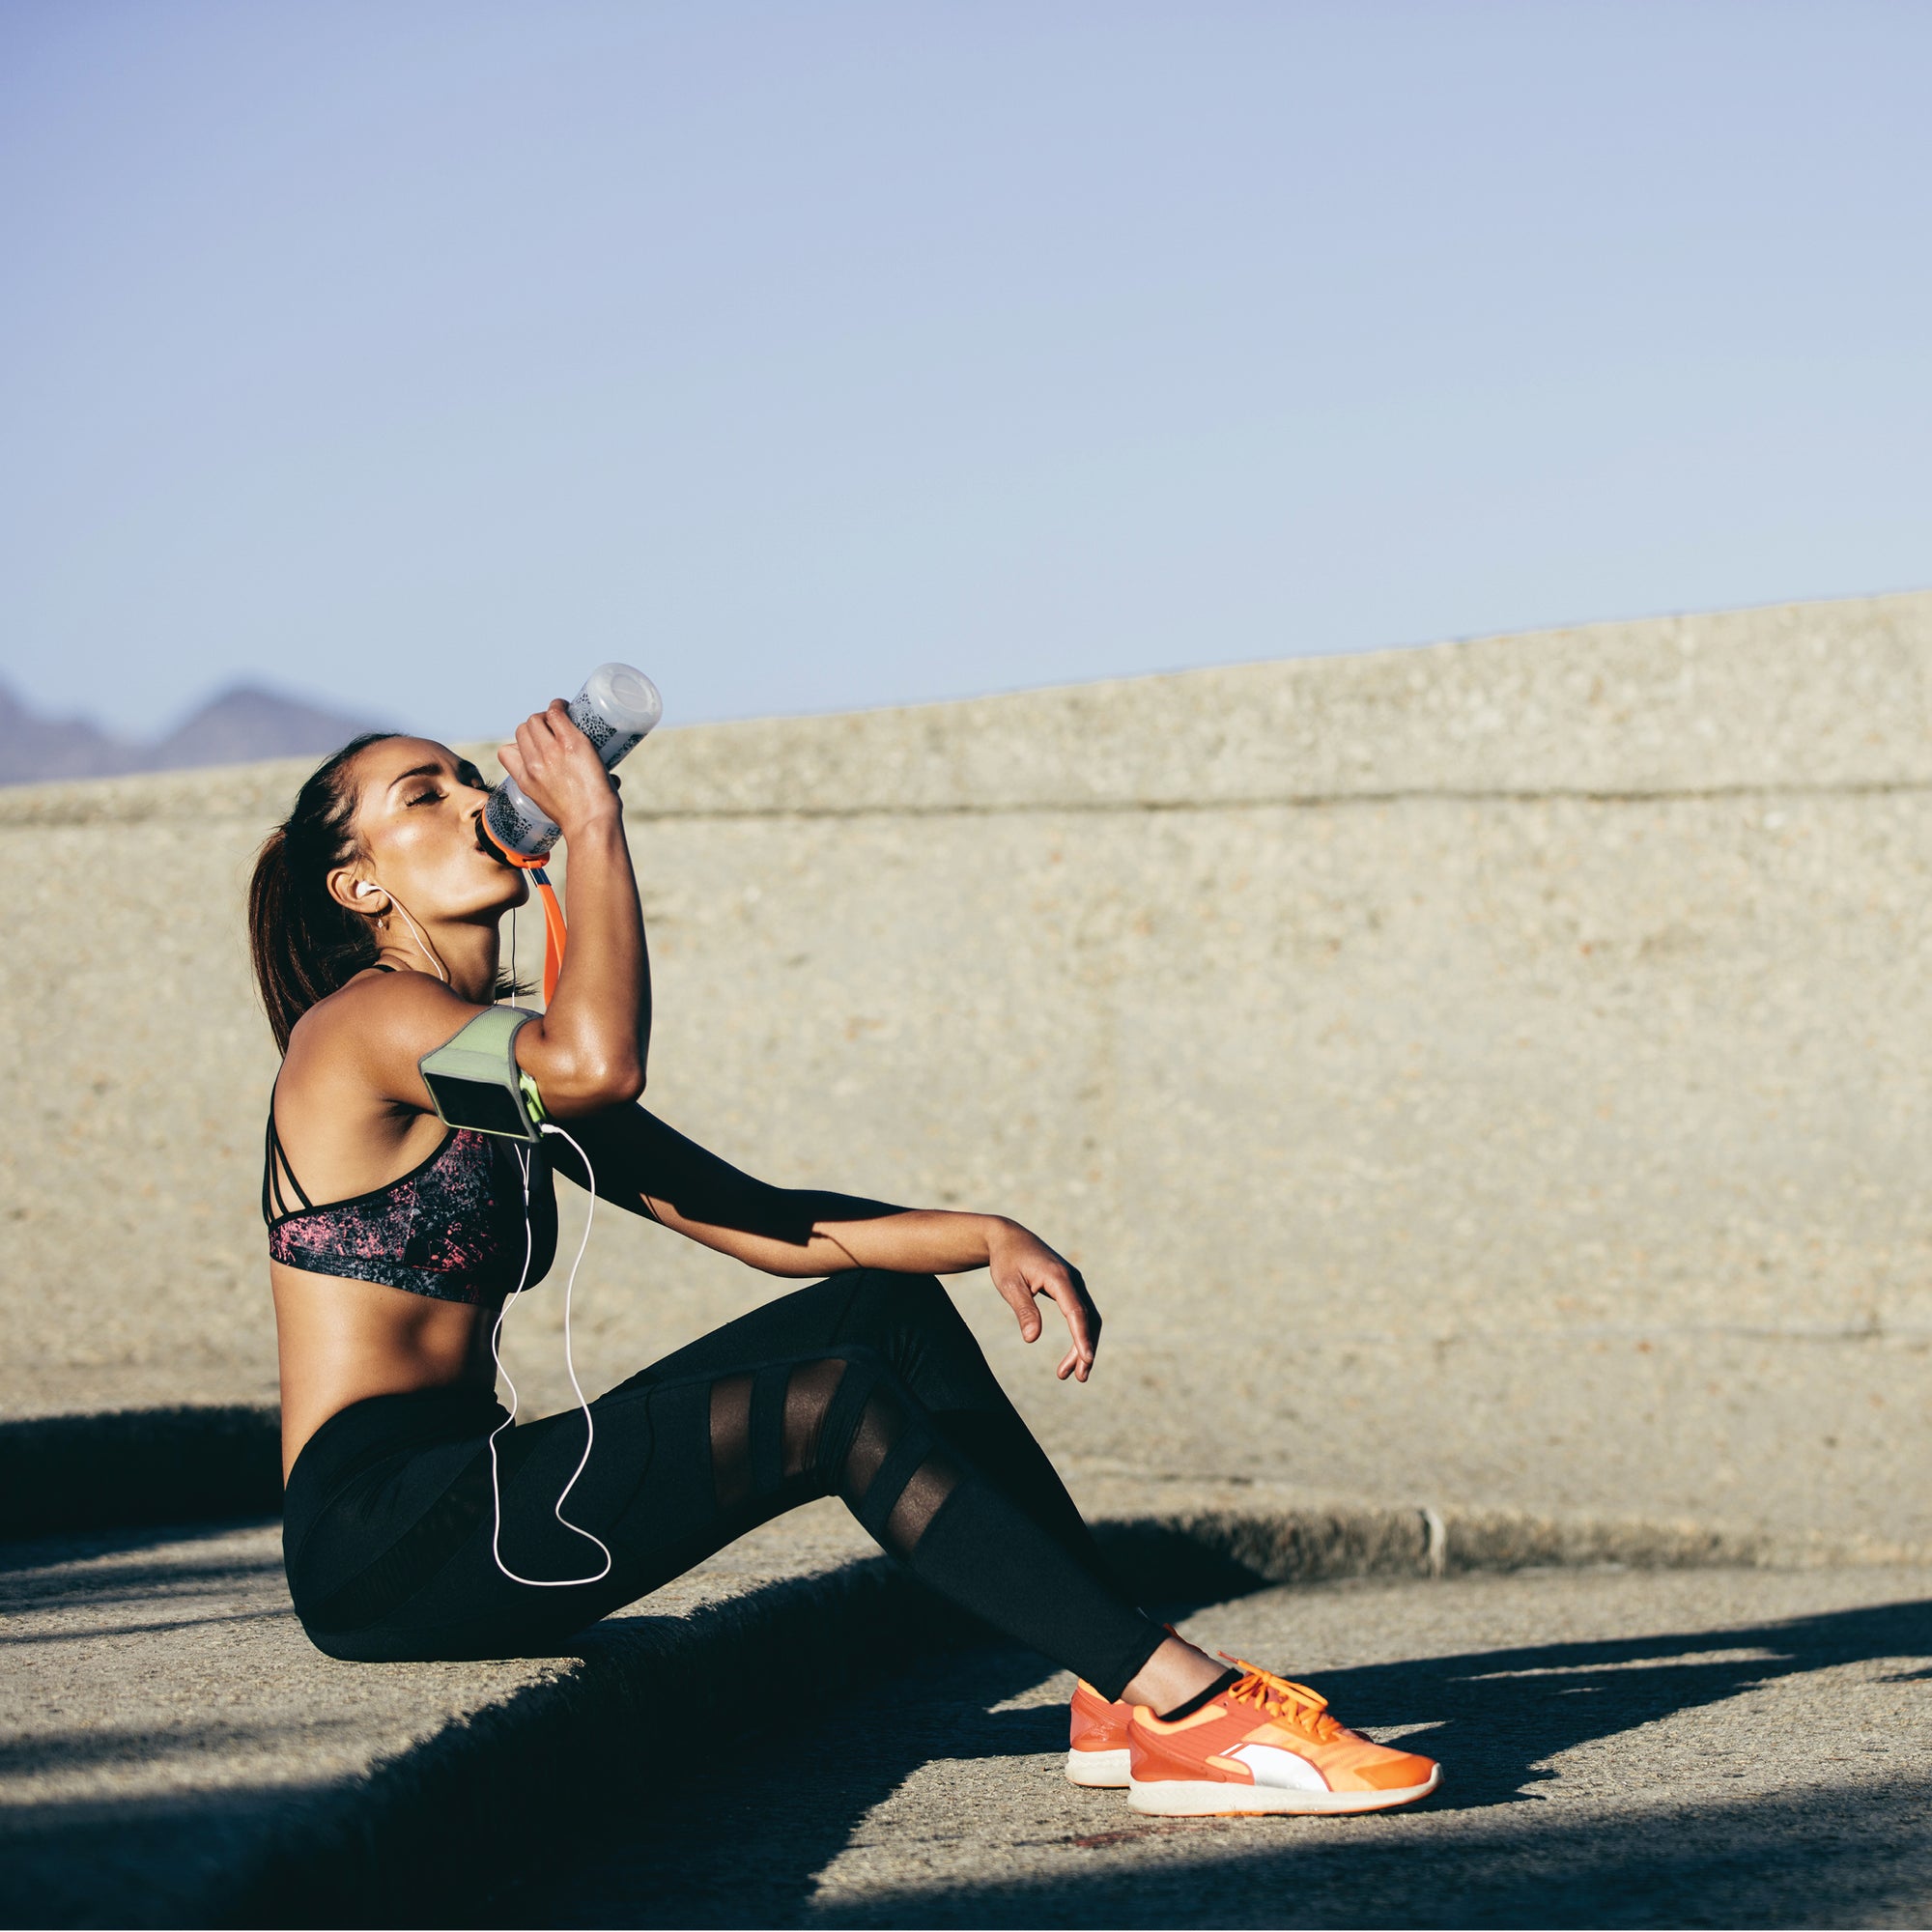 6 Electrolytes and Why They're Important